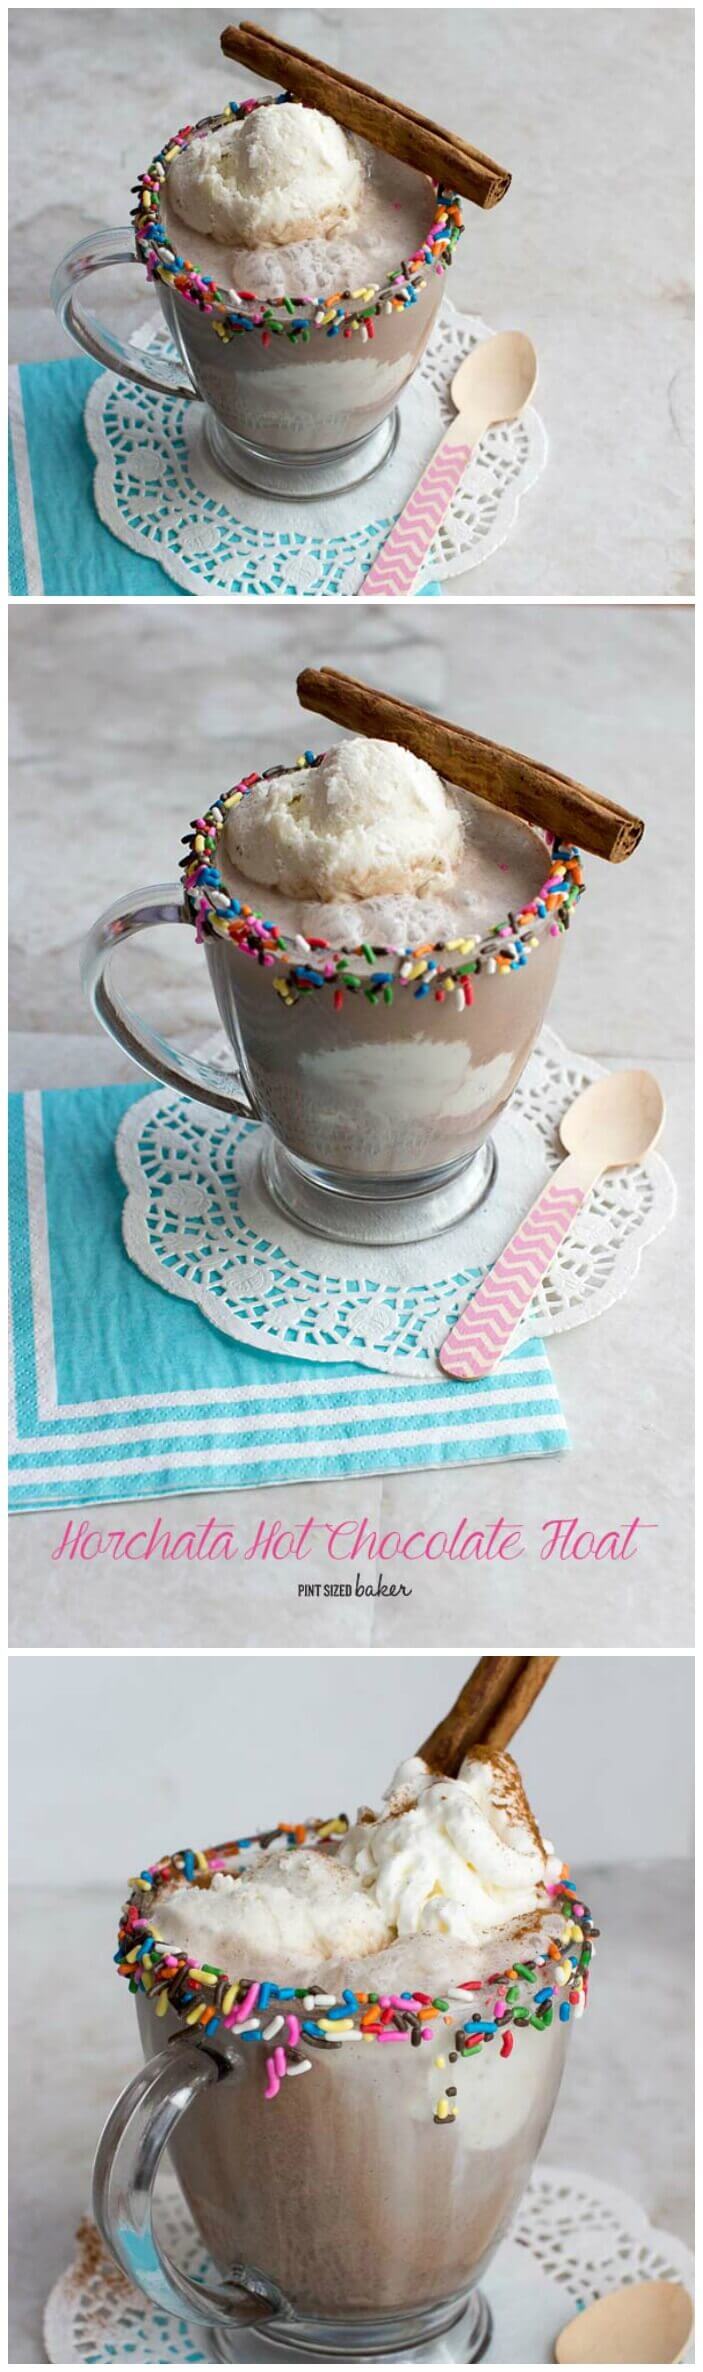 Hot Chocolate has a new BFF - Hotchata Hot Chocolate Float! Cinnamon, chocolate and ice cream is an awesome dessert.